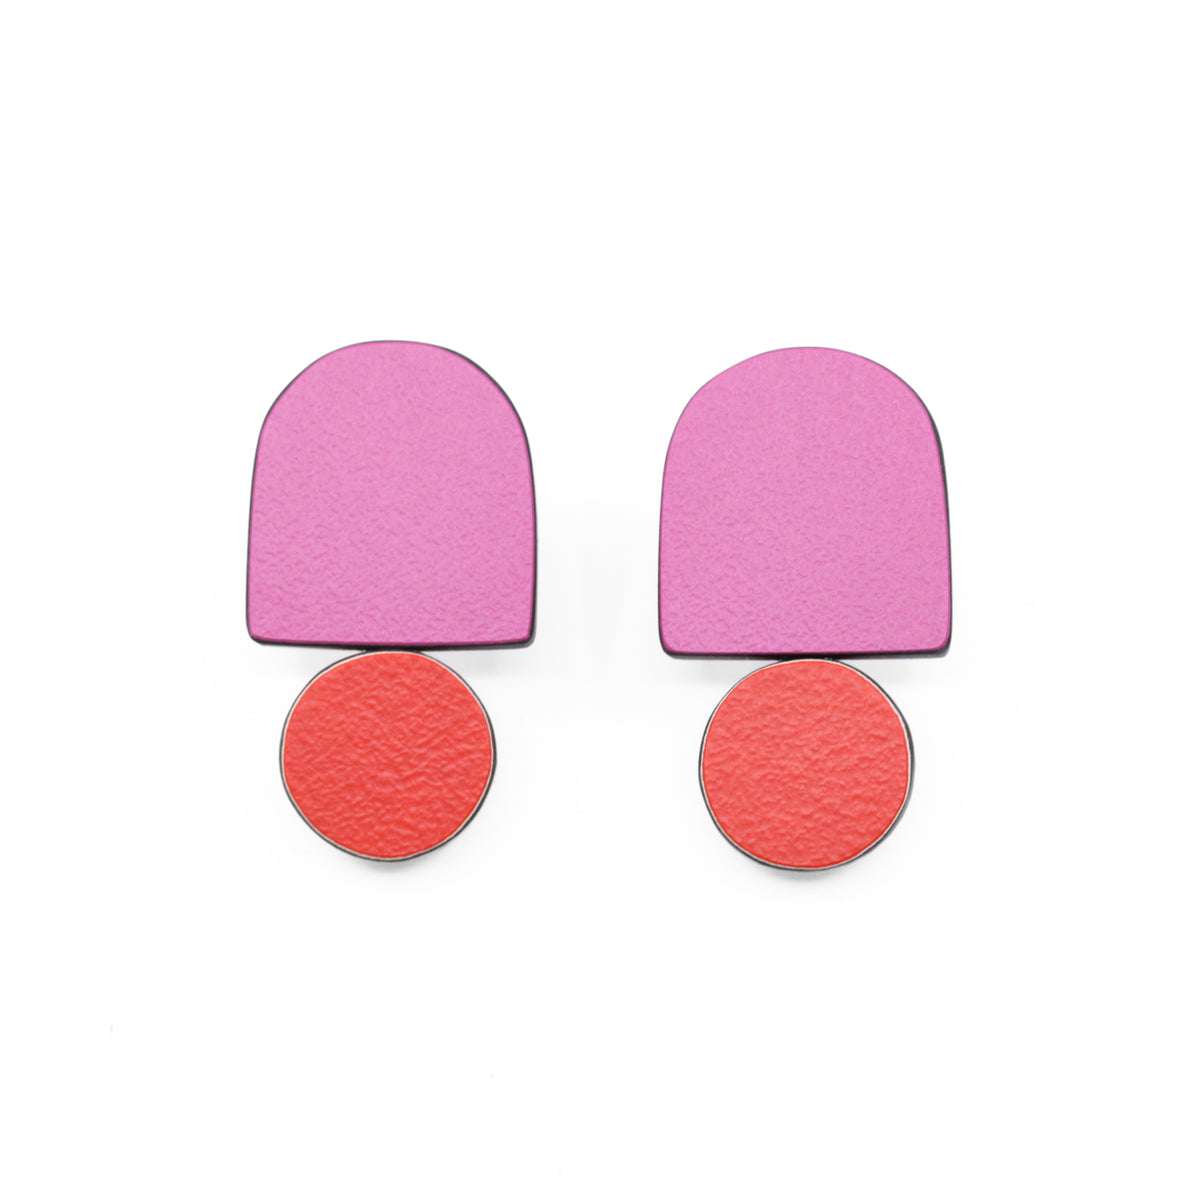 Arch and circle earrings - pink and red